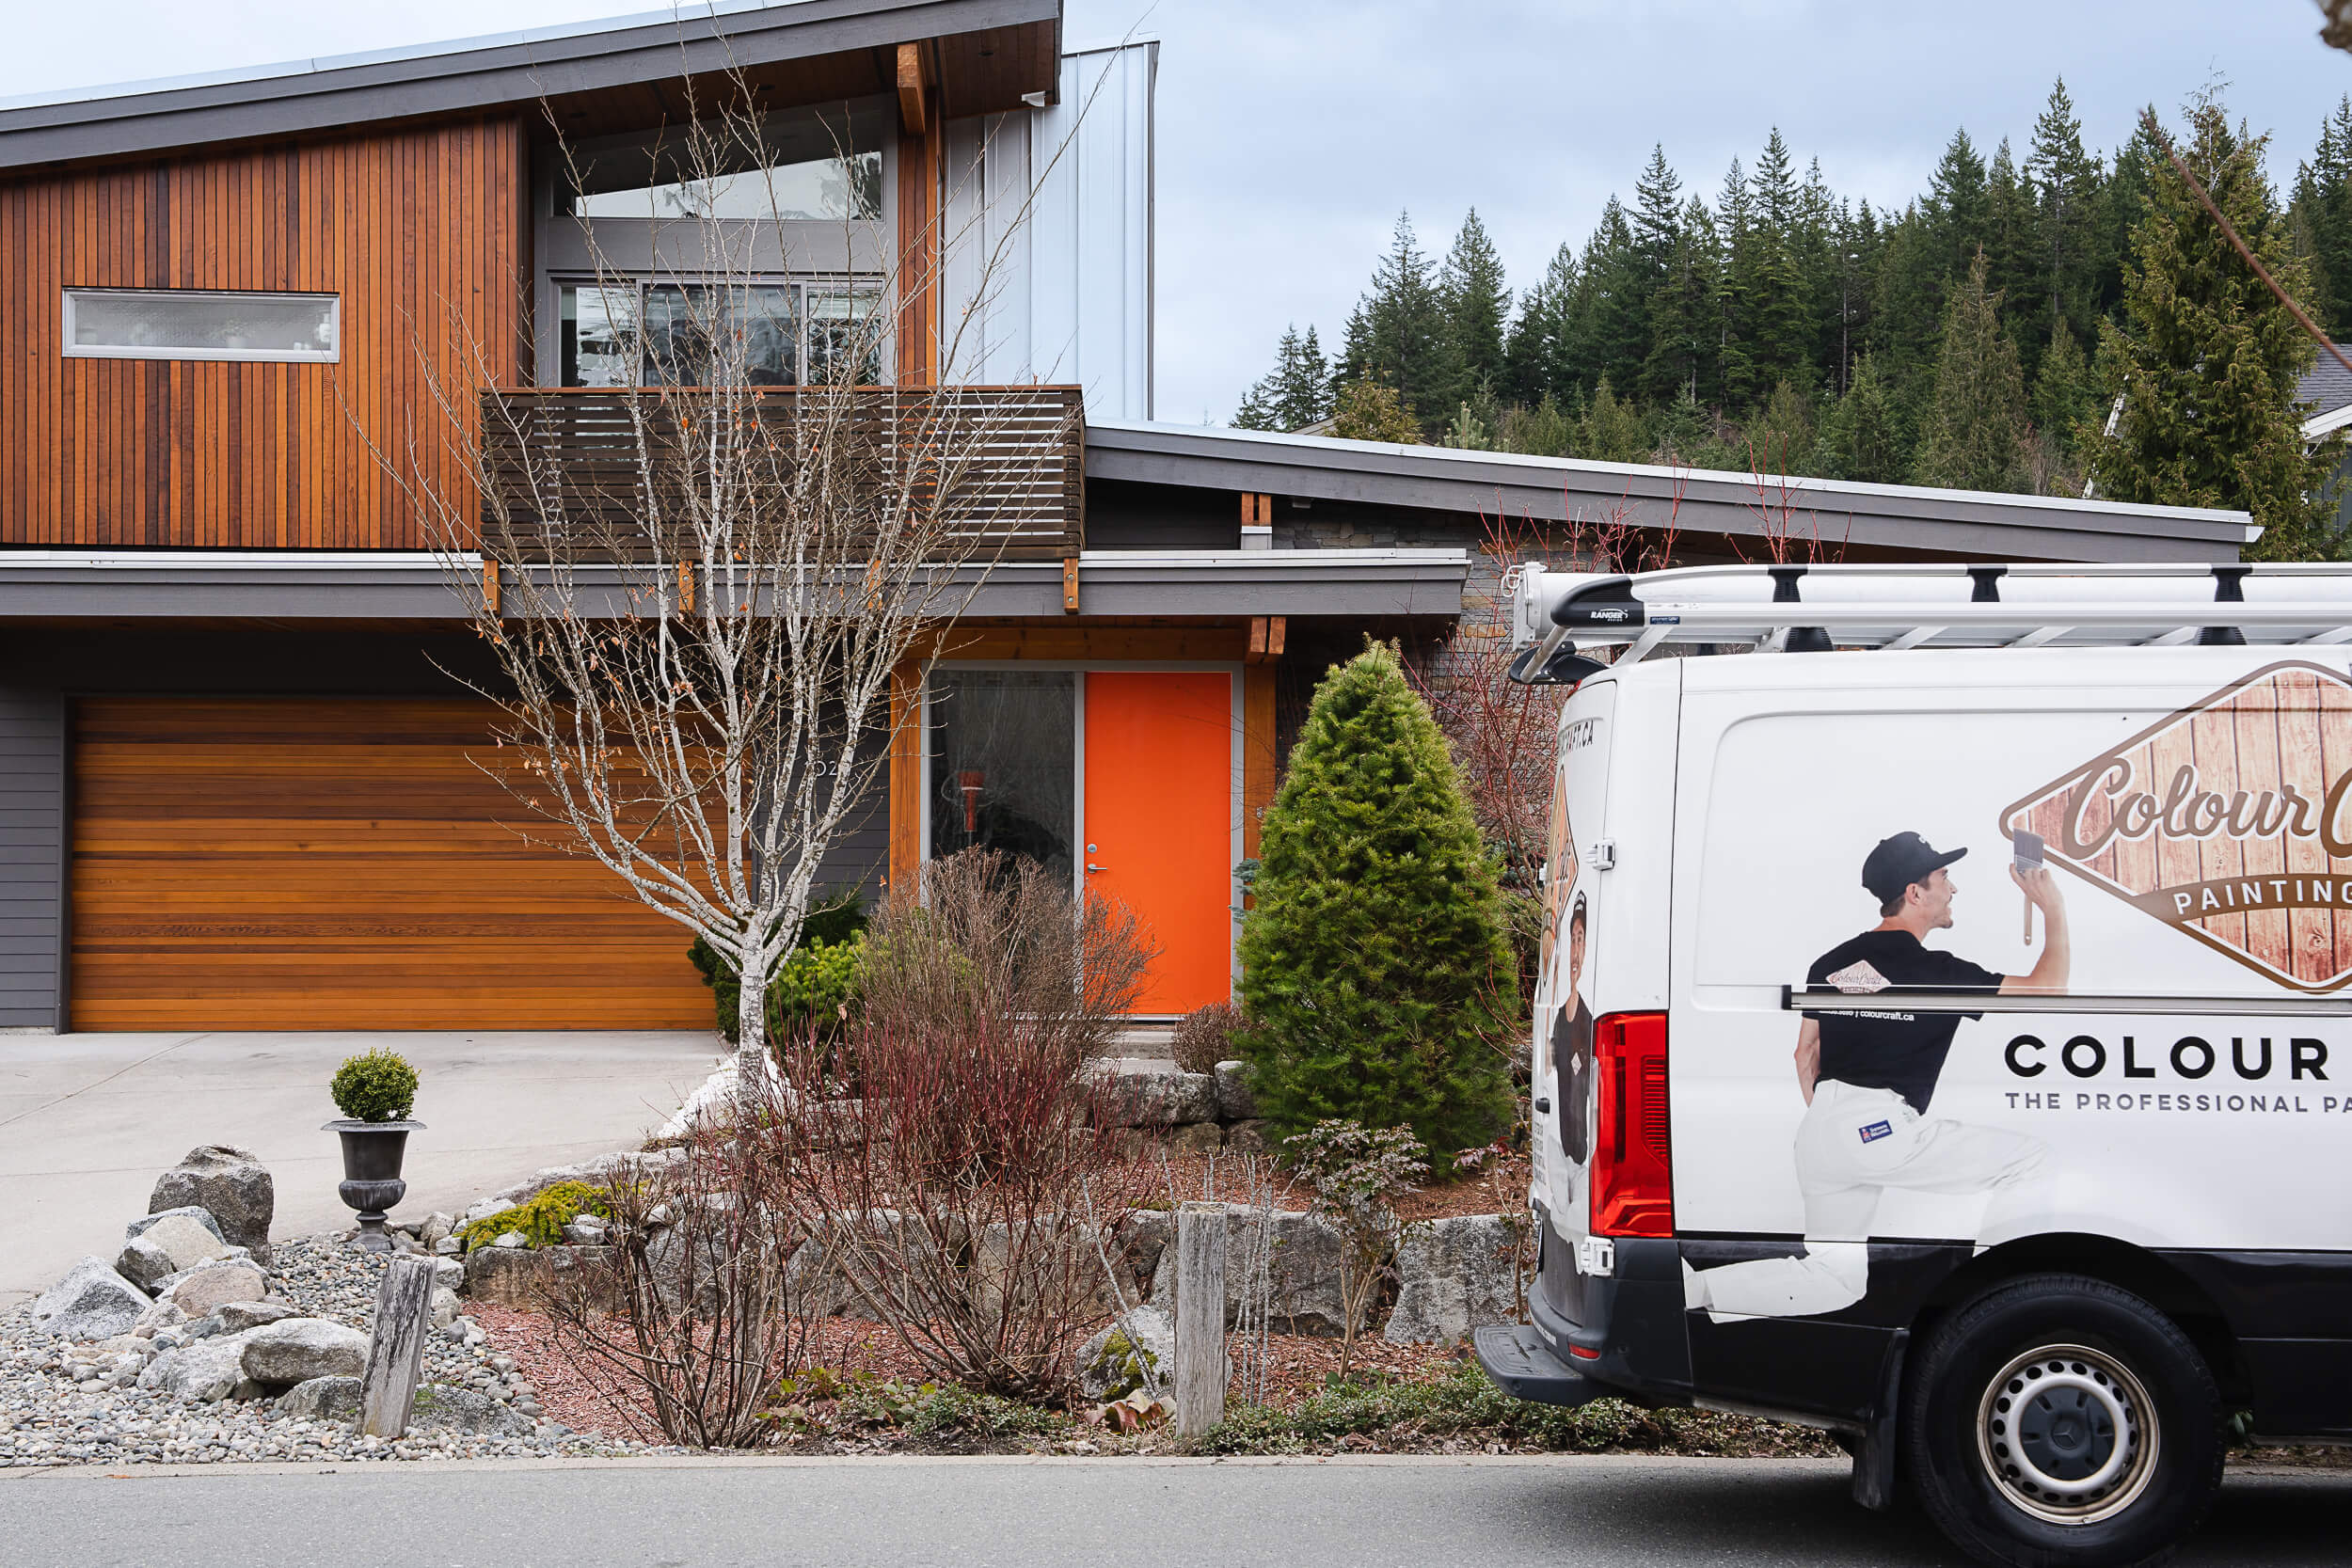 Captured in this lifestyle photography scene is the Colour Craft Painting van parked outside a modern home with striking wood and orange accents. The image reflects the company's active presence in the community, poised to deliver quality painting services.